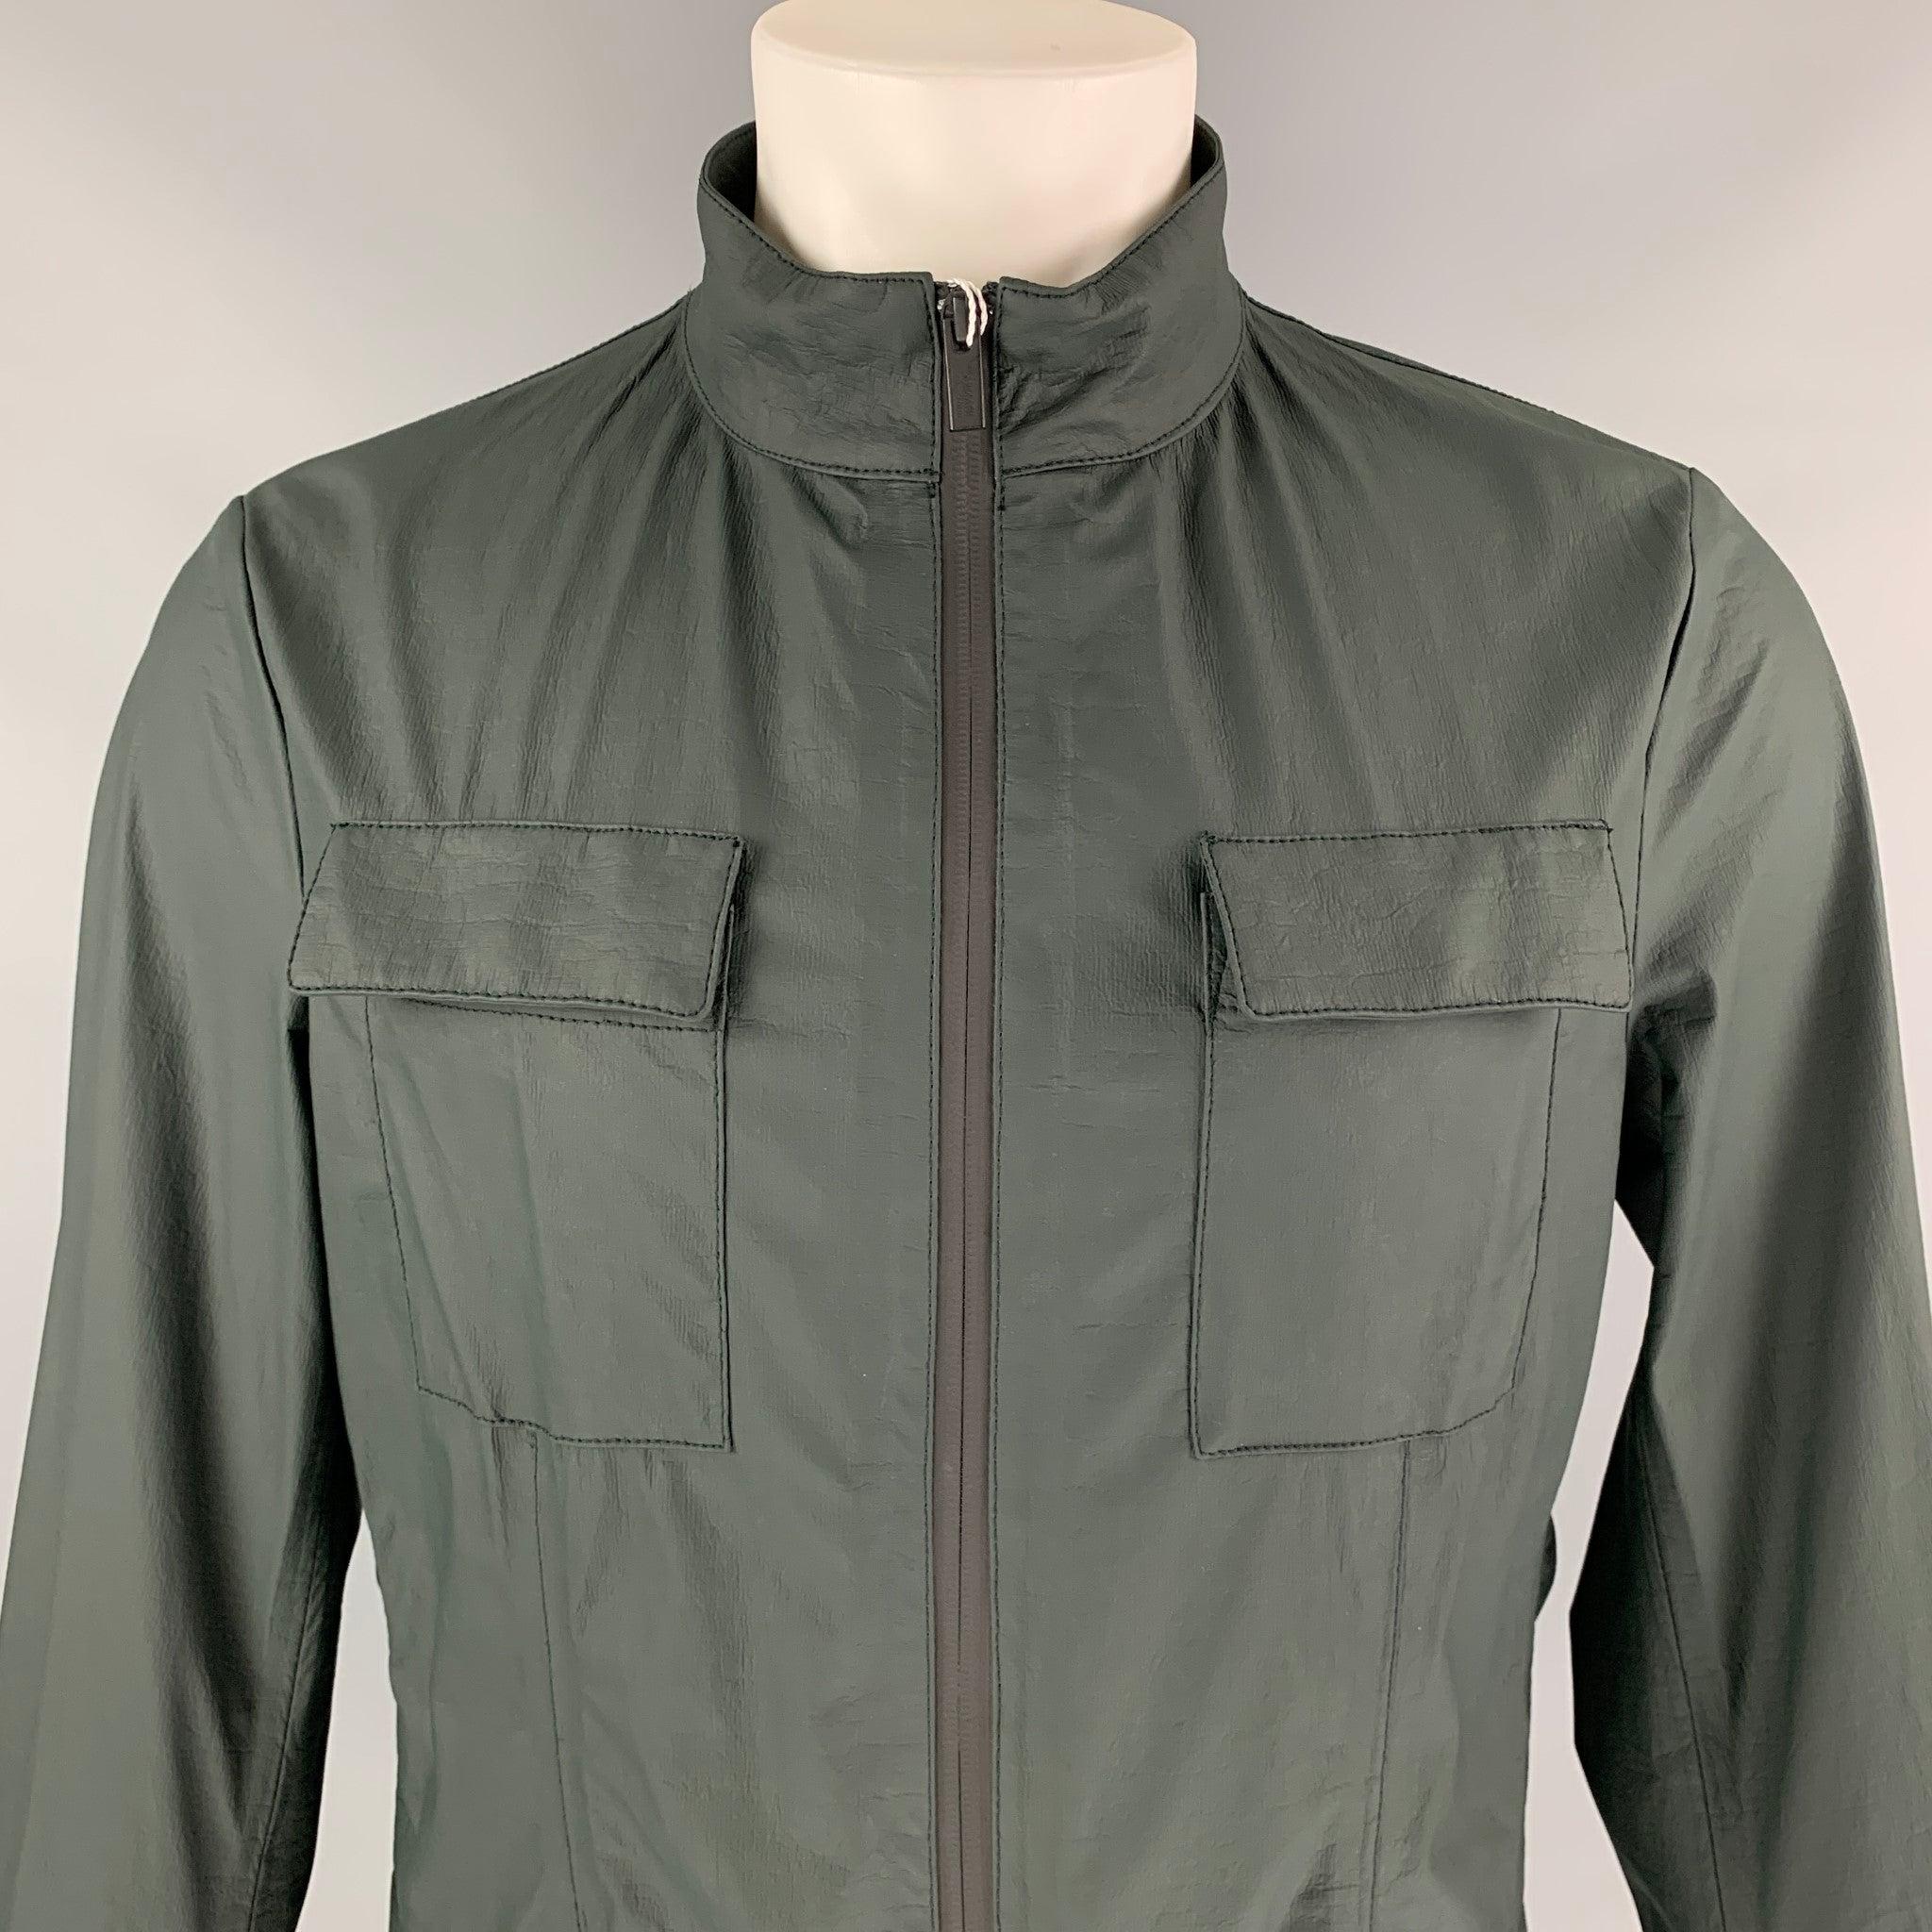 ARMANI COLLEZIONI jacket comes in a dark green polyethylene jacket featuring a water repellent material featuring a high collar, four front pockets, and a zip up closure.
New With Tags.
 

Marked:   48 

Measurements: 
 
Shoulder: 17.5 inches 